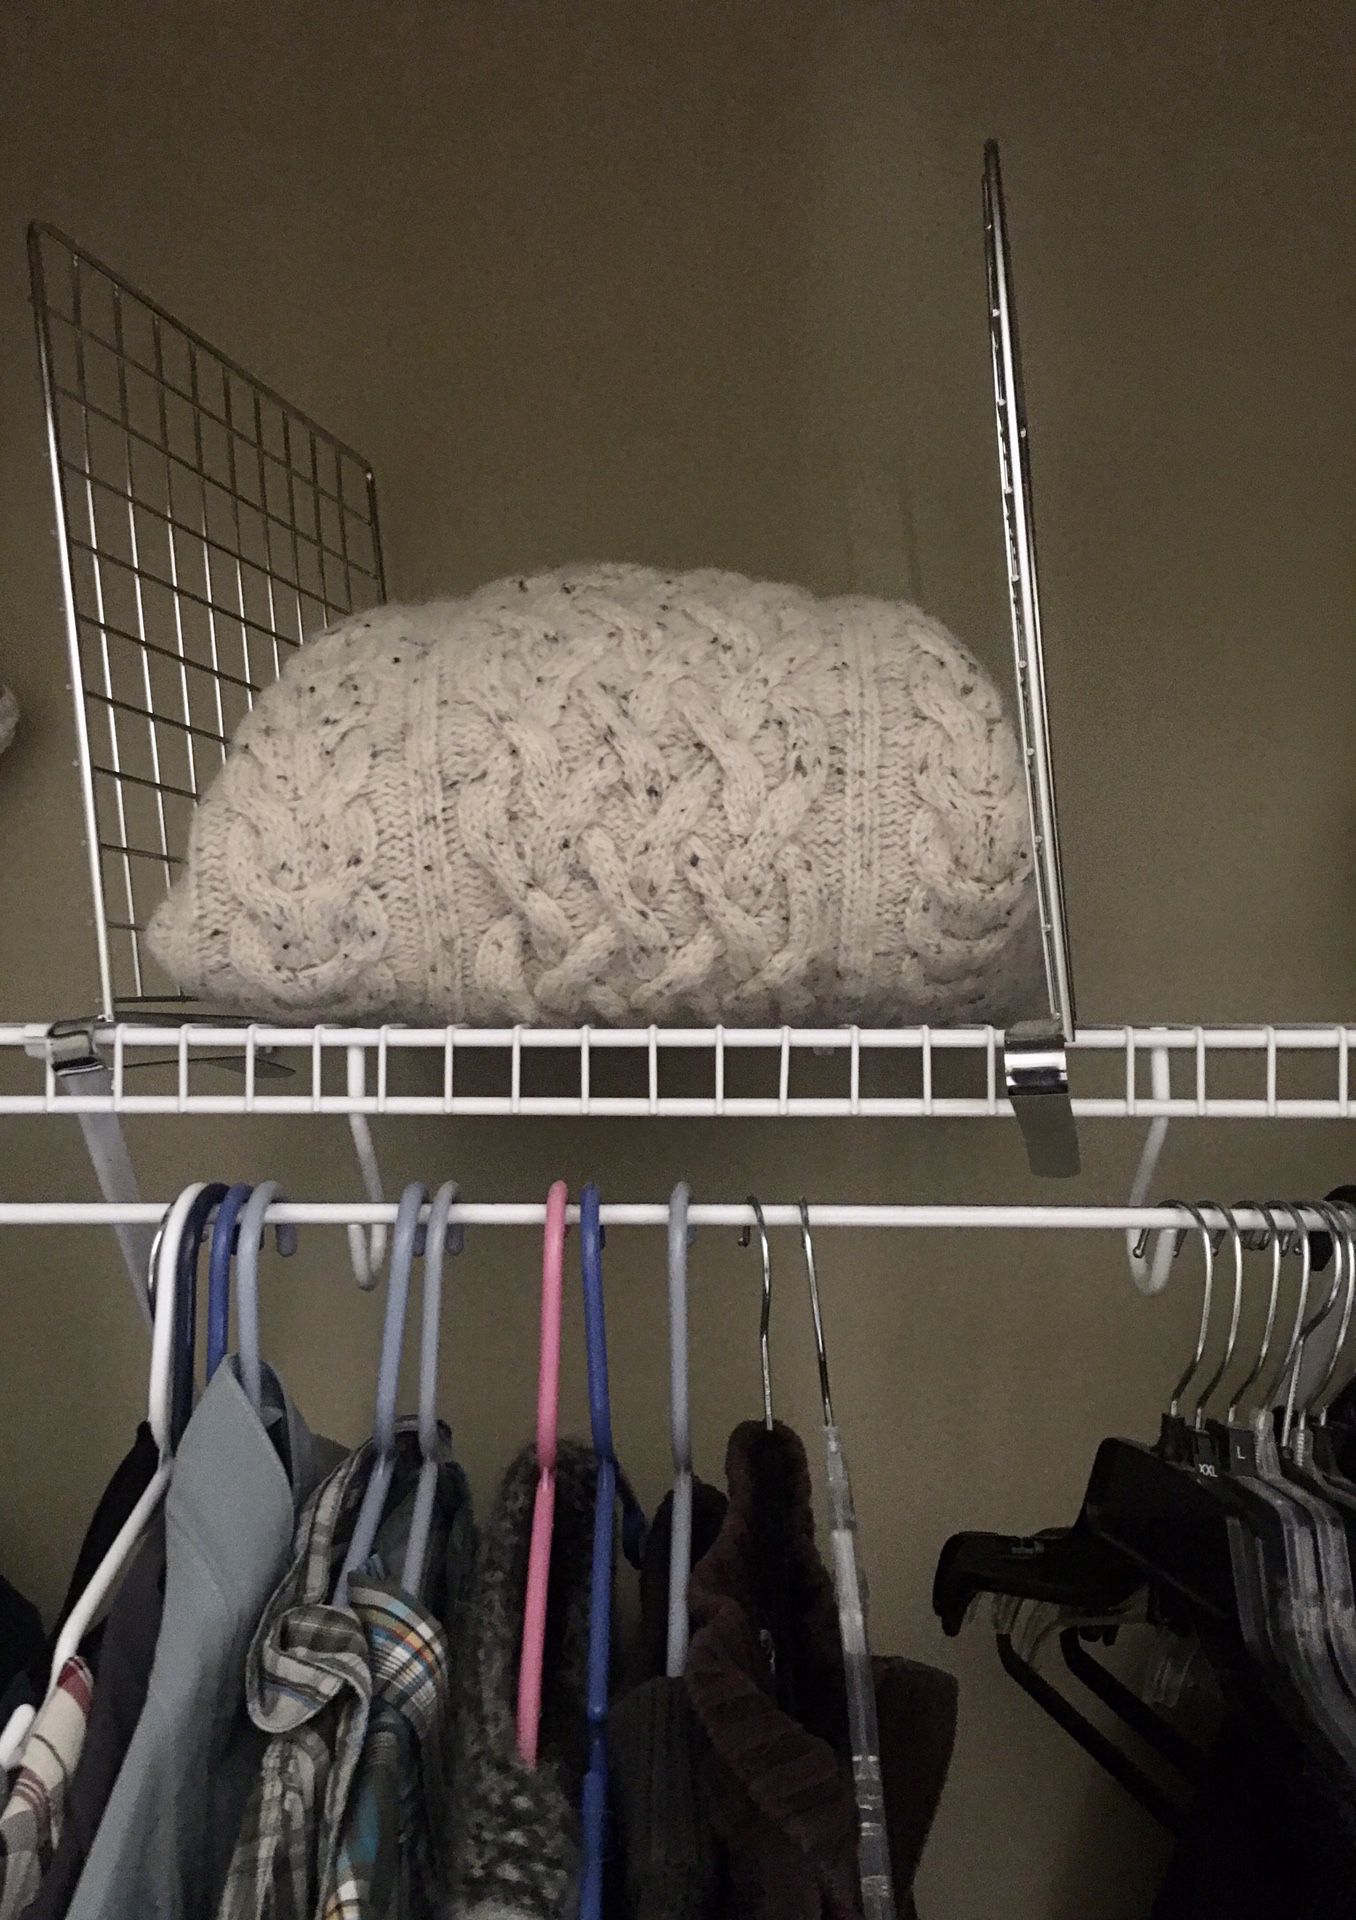 Eight Closet organizer wire shelving-expand your closet space simply with these